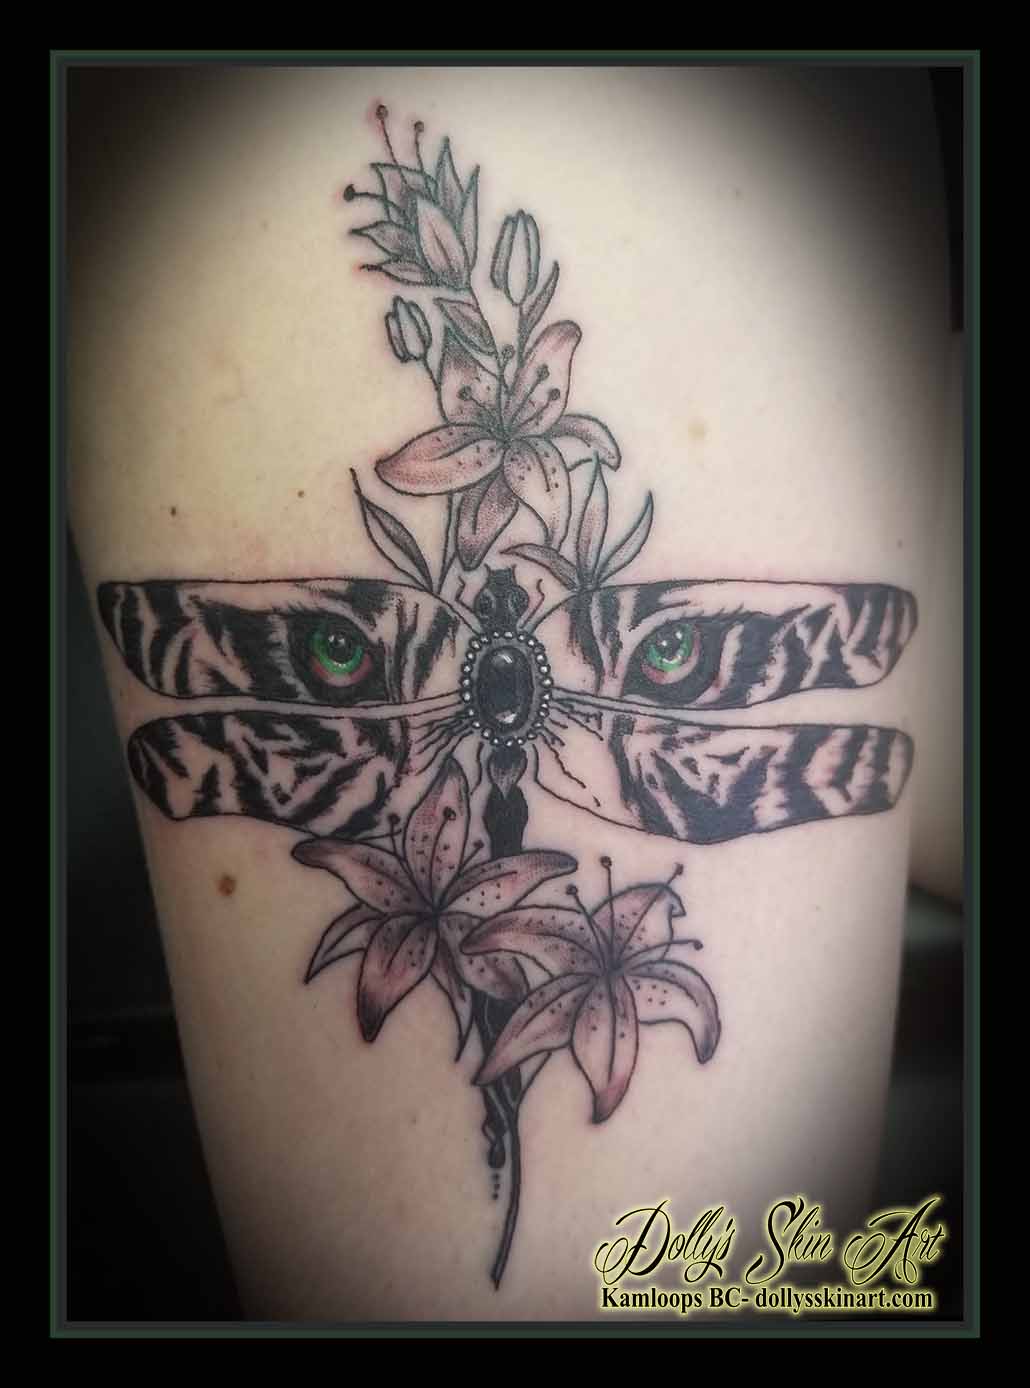 dragonfly tattoo lilies tiger black and grey shading green white flowers tattoo kamloops dolly's skin art